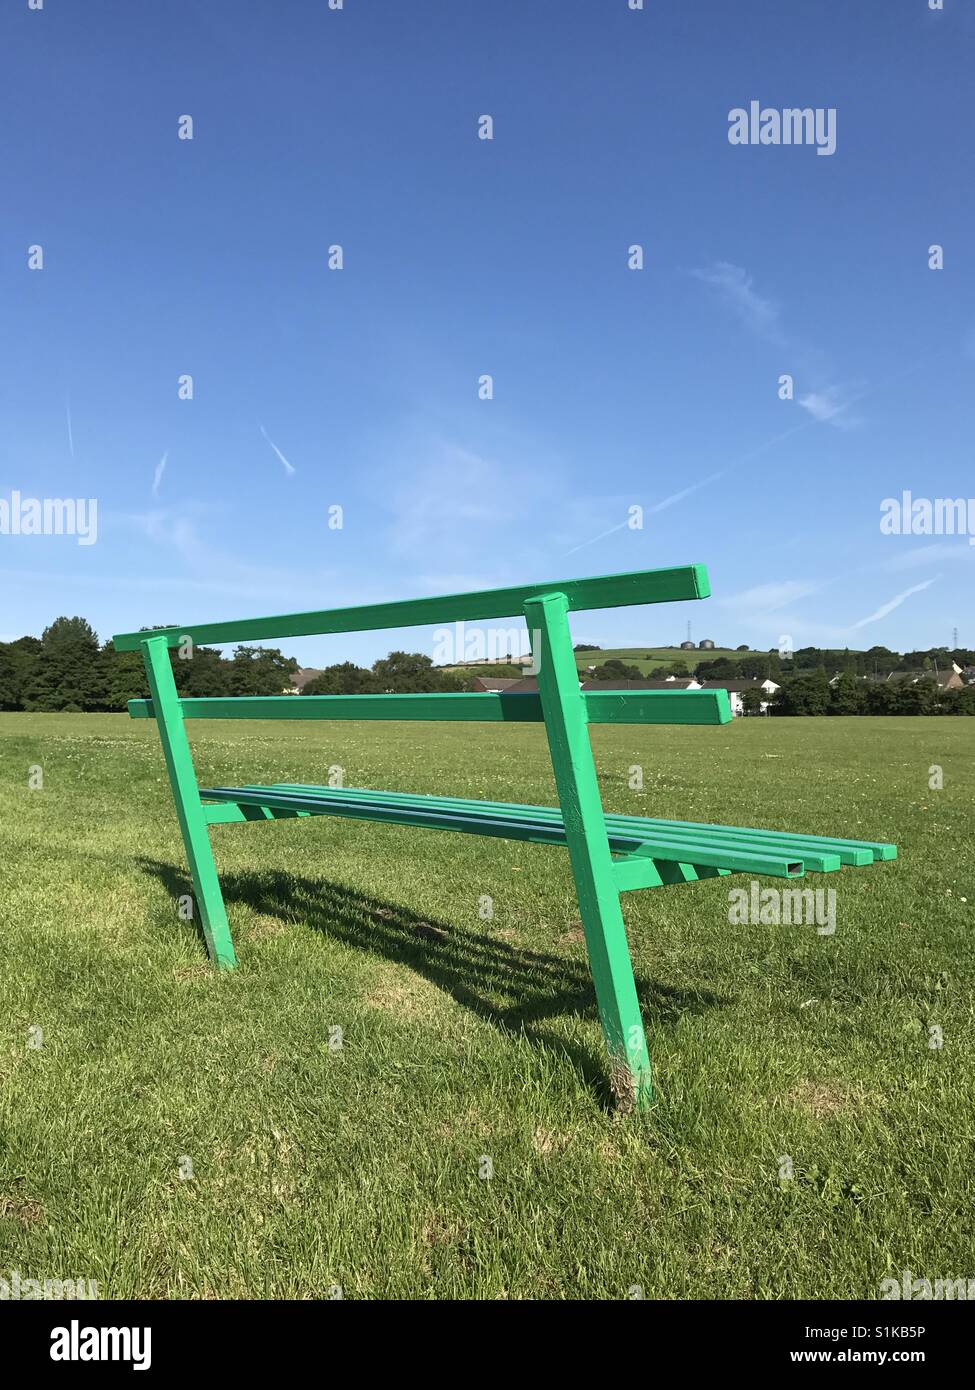 Empty green bench in a public park with a cricket pitch (upright format) Stock Photo